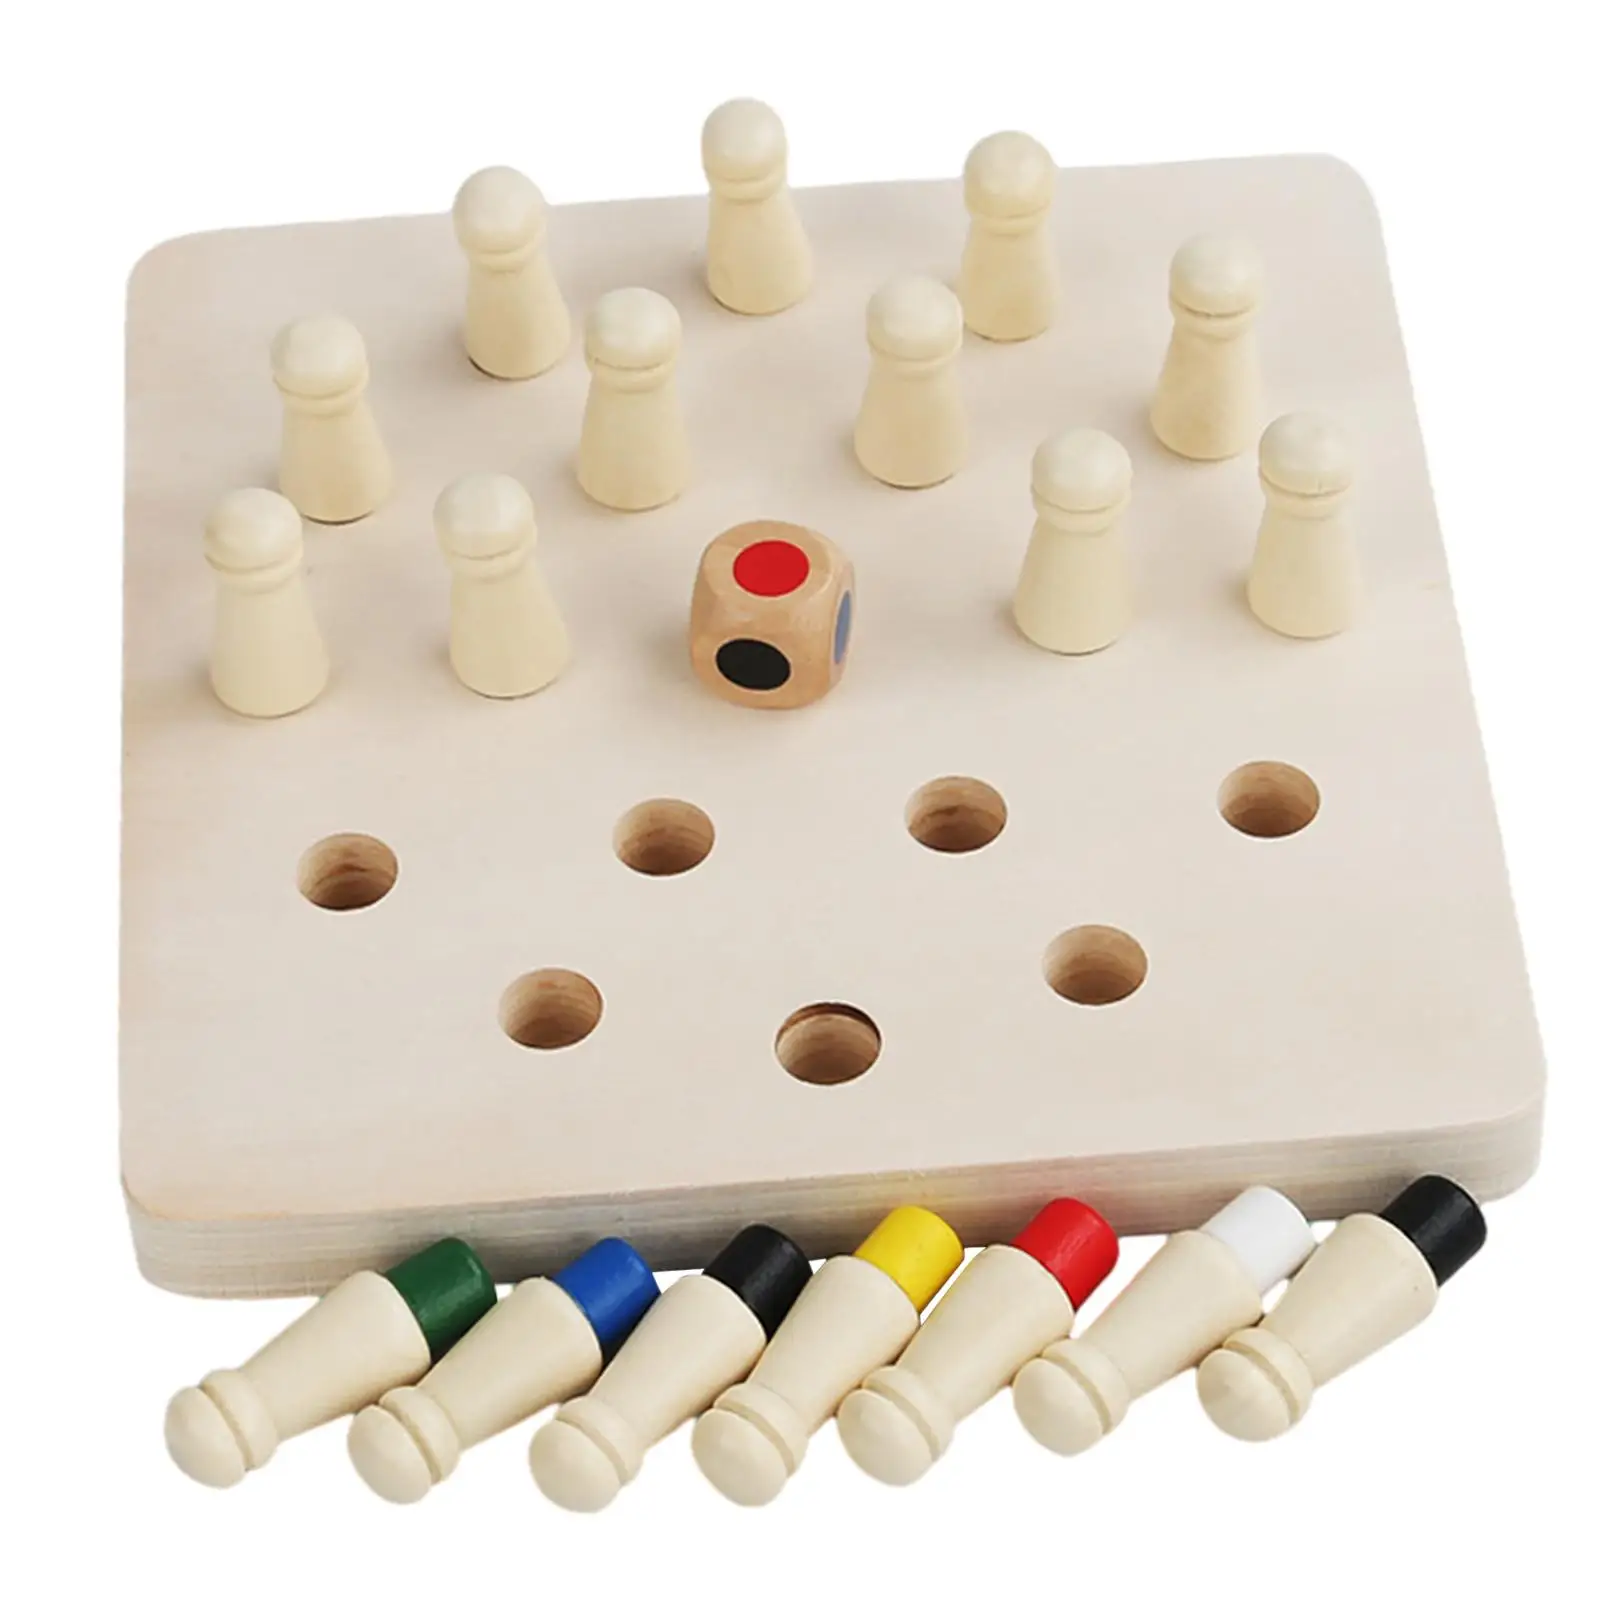 Memory Chess Toys Learning Activities Educational Toys Preschool Learning Toy Wooden Memory Chess Game for Toddlers Boys Adults